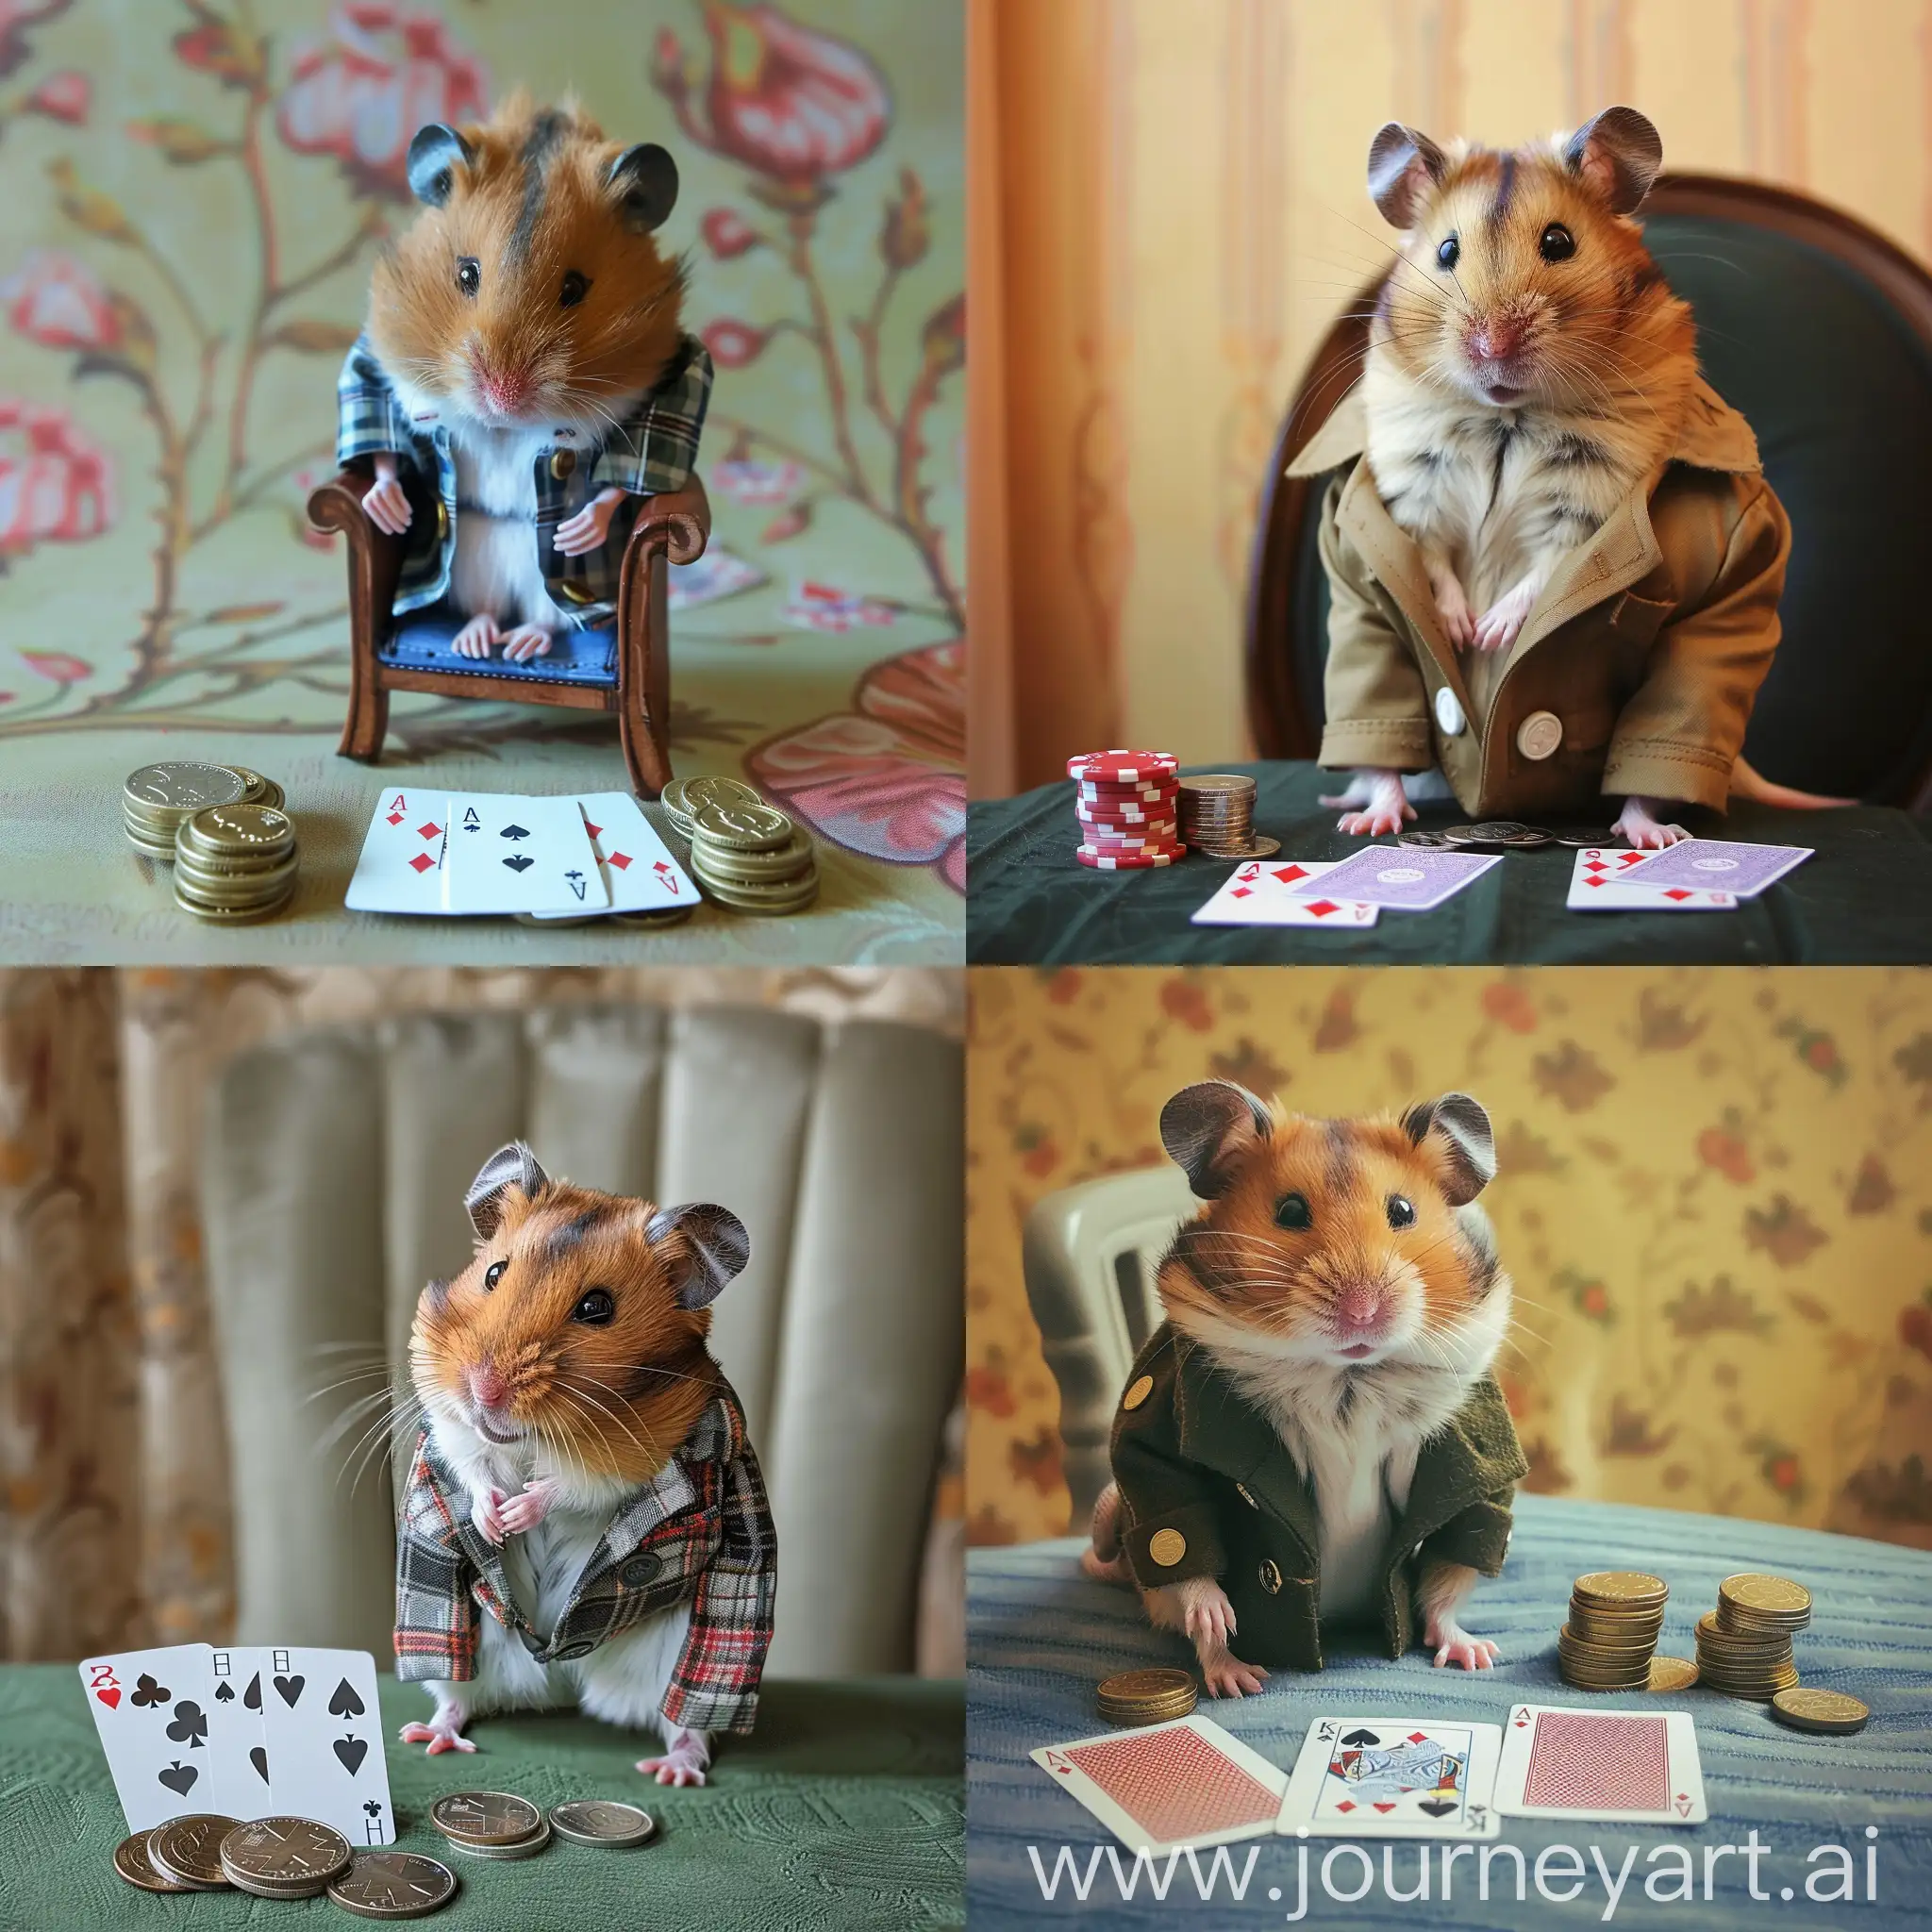 Sophisticated-Hamster-Relaxing-in-Smoking-Jacket-with-Coins-and-Cards